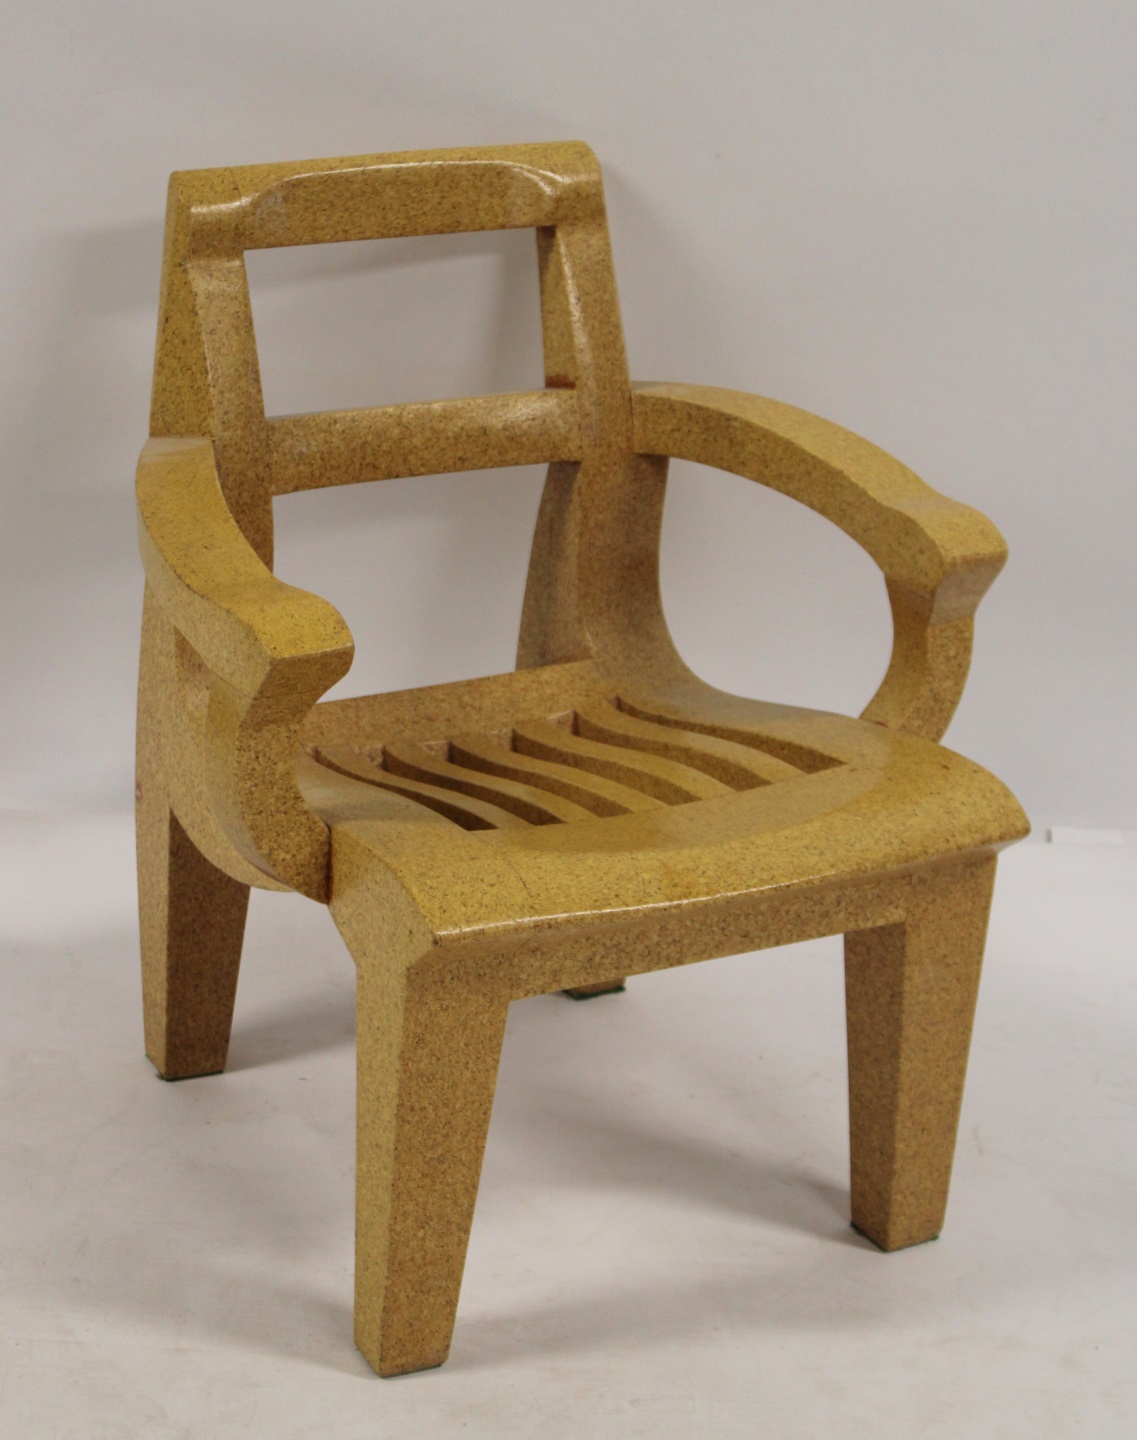 KEVIN WALZ SIGNED CORK CHAIR. Circa